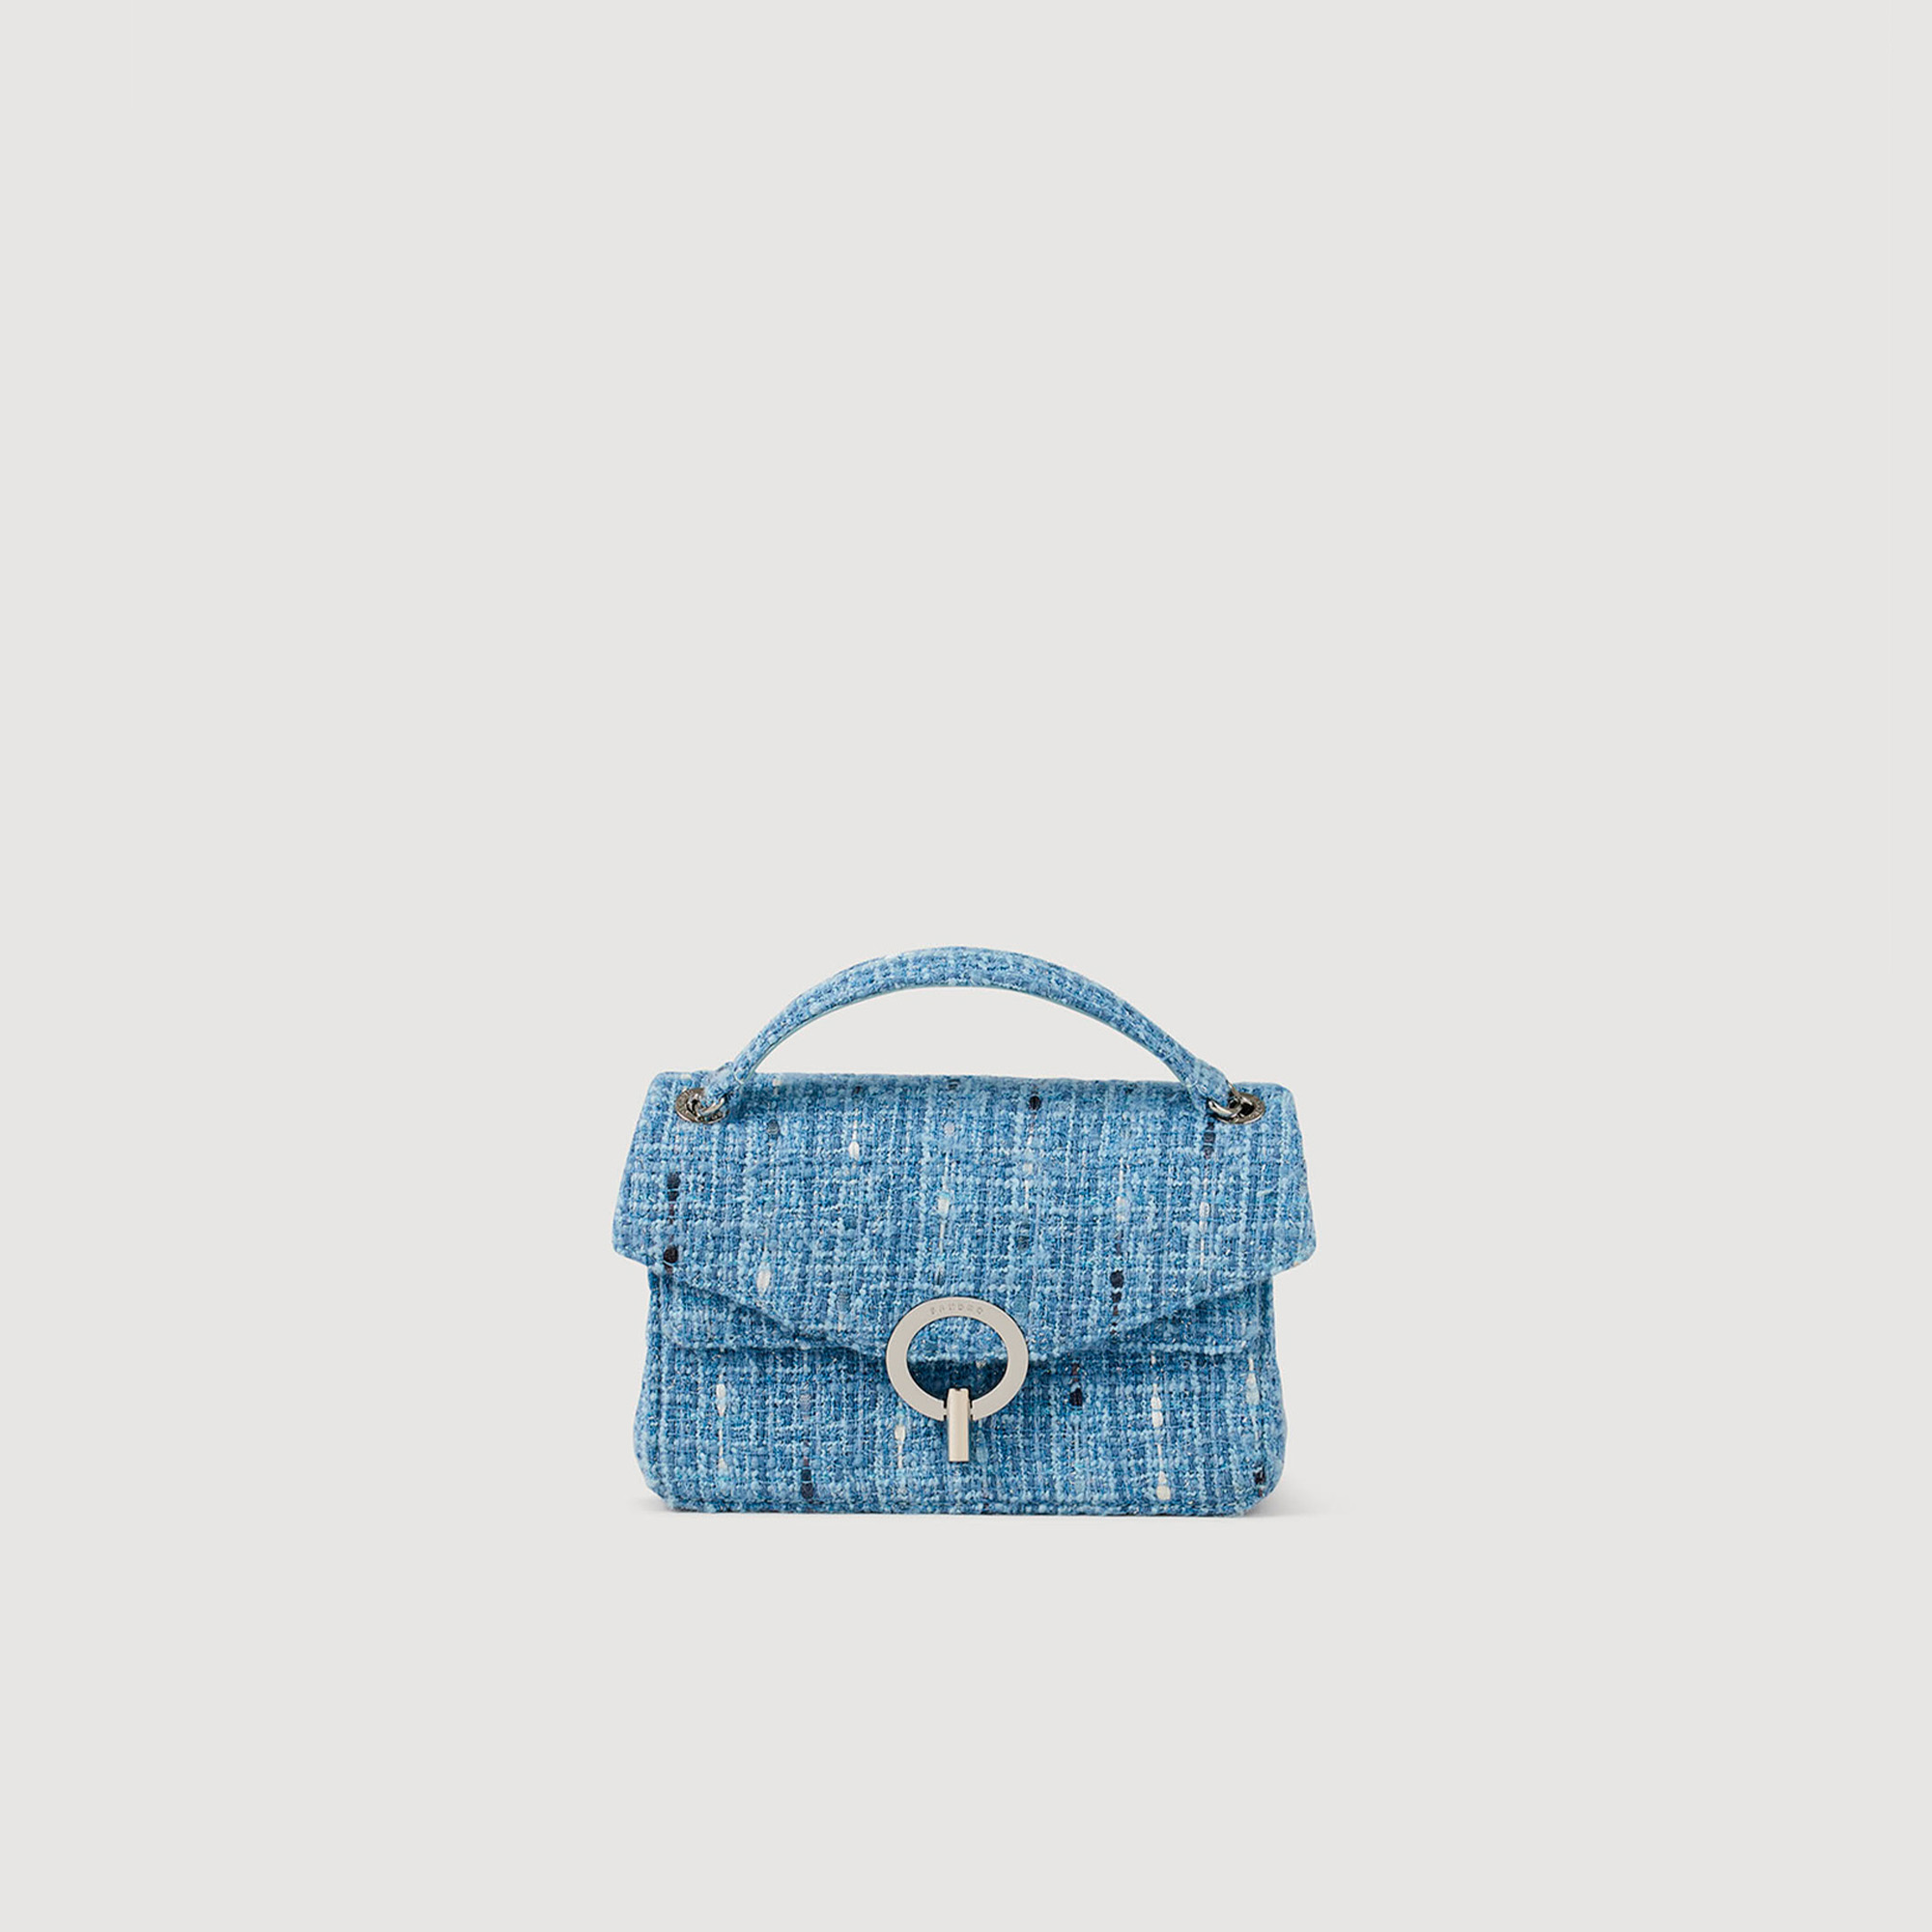 Sandro acrylic The iconic Yza bag is now available in tweed